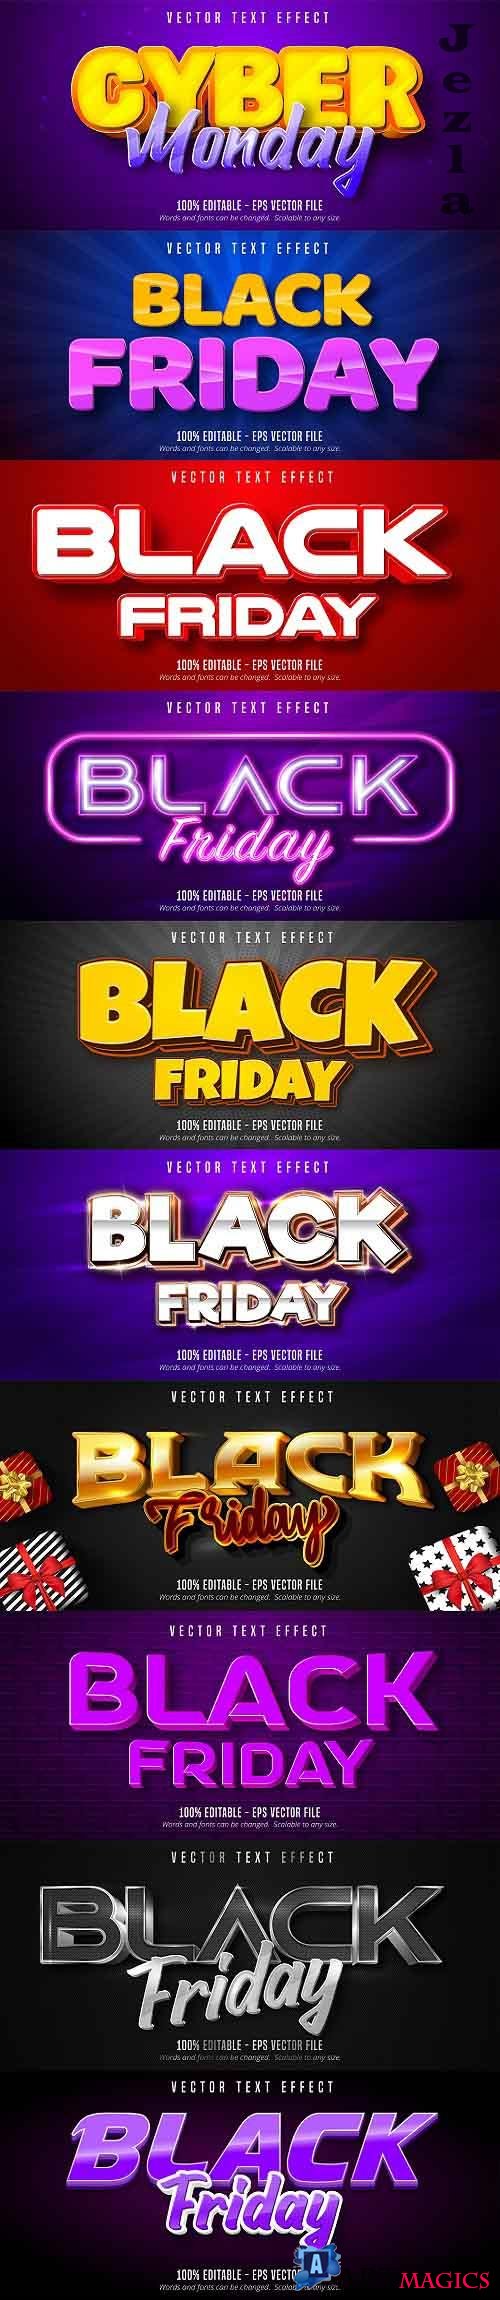 Editable font effect text collection illustration design 205 - Black Friday Text